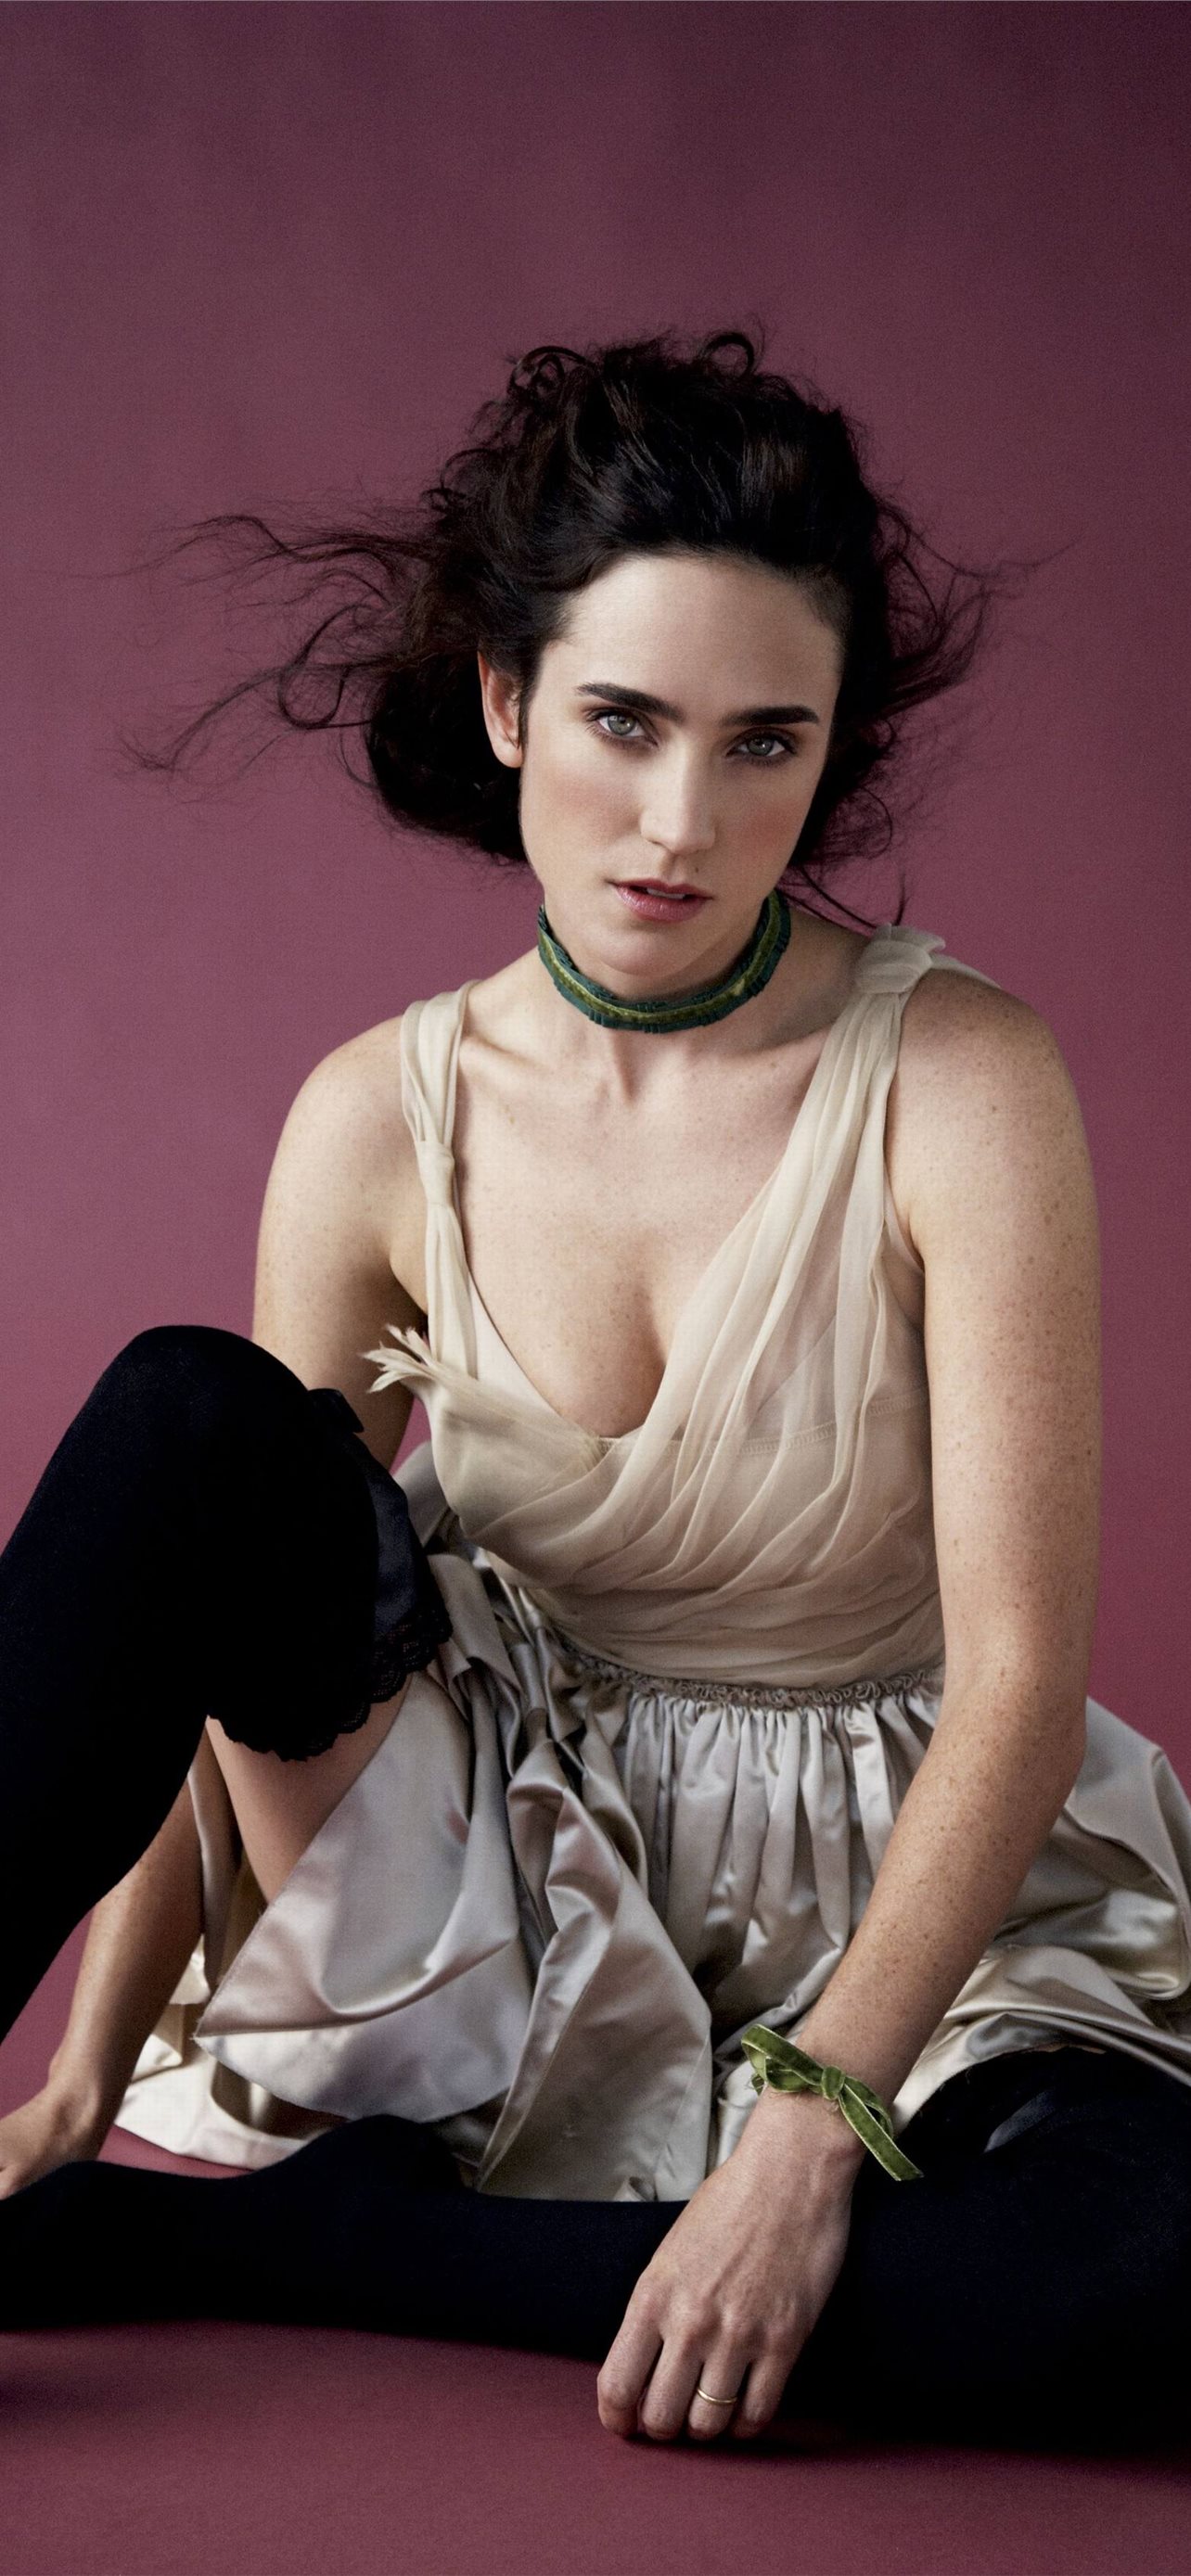 Jennifer Connelly Free iPhone wallpaper